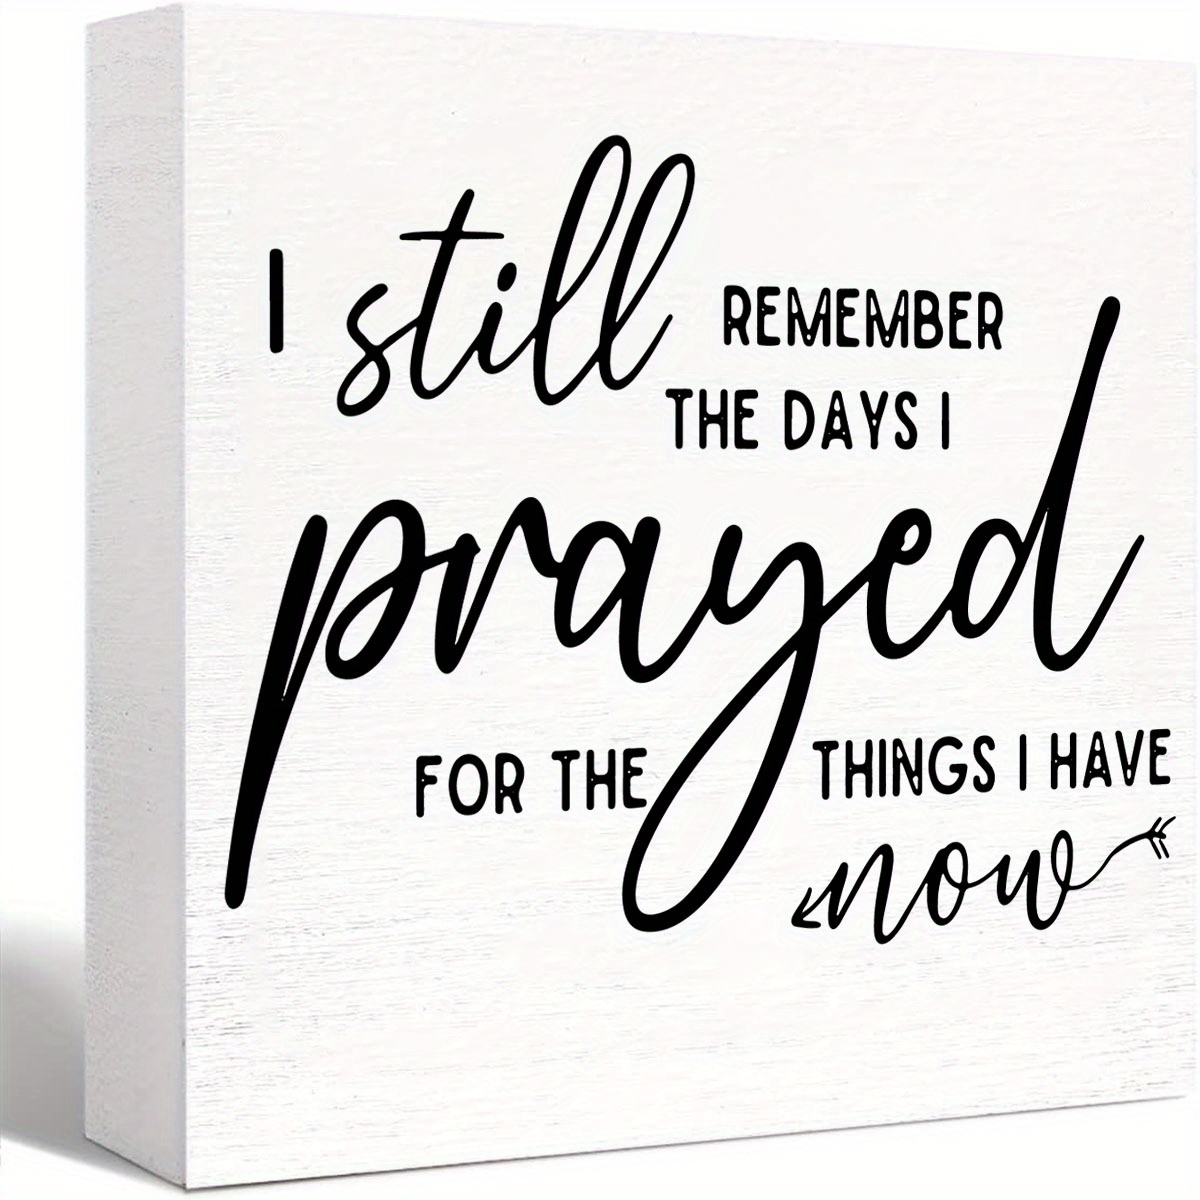 

1pc, Rustic Wooden Sign With Inspirational Quote, "i Still Remember The Days I Prayed For The Things I Have Now", Vintage Style Office & Bathroom Shelf Decor, Motivational Wooden Plaque For Home Decor